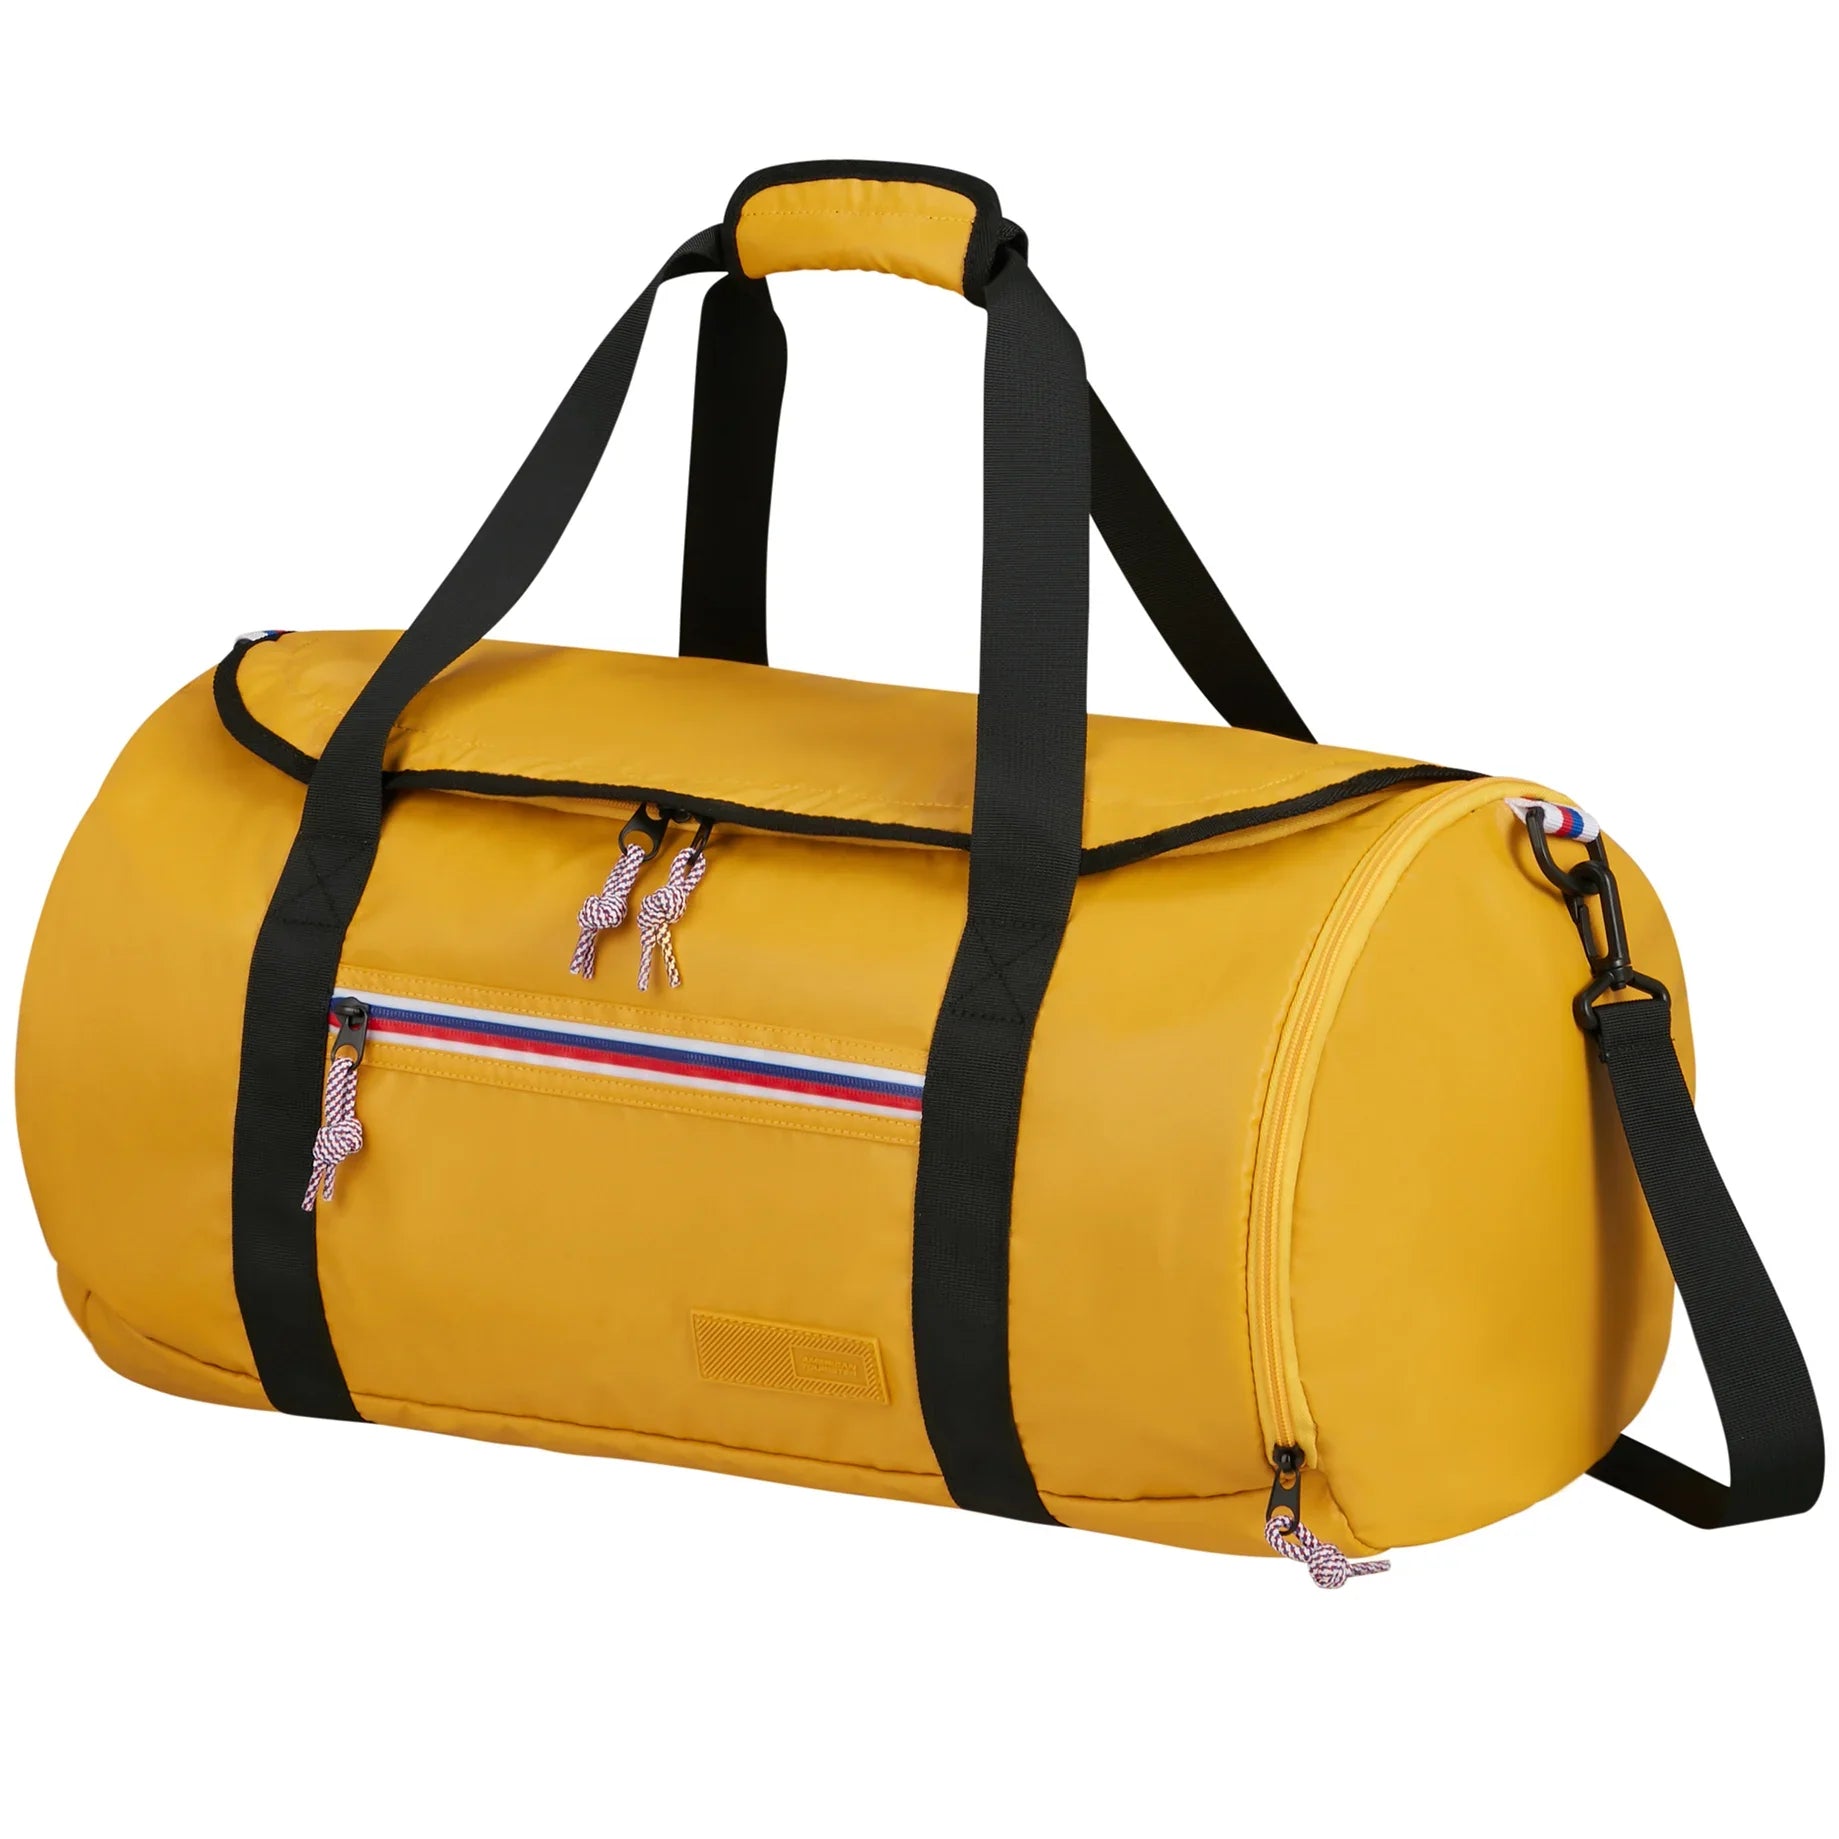 American Tourister Upbeat Pro coated travel bag 55 cm - Yellow